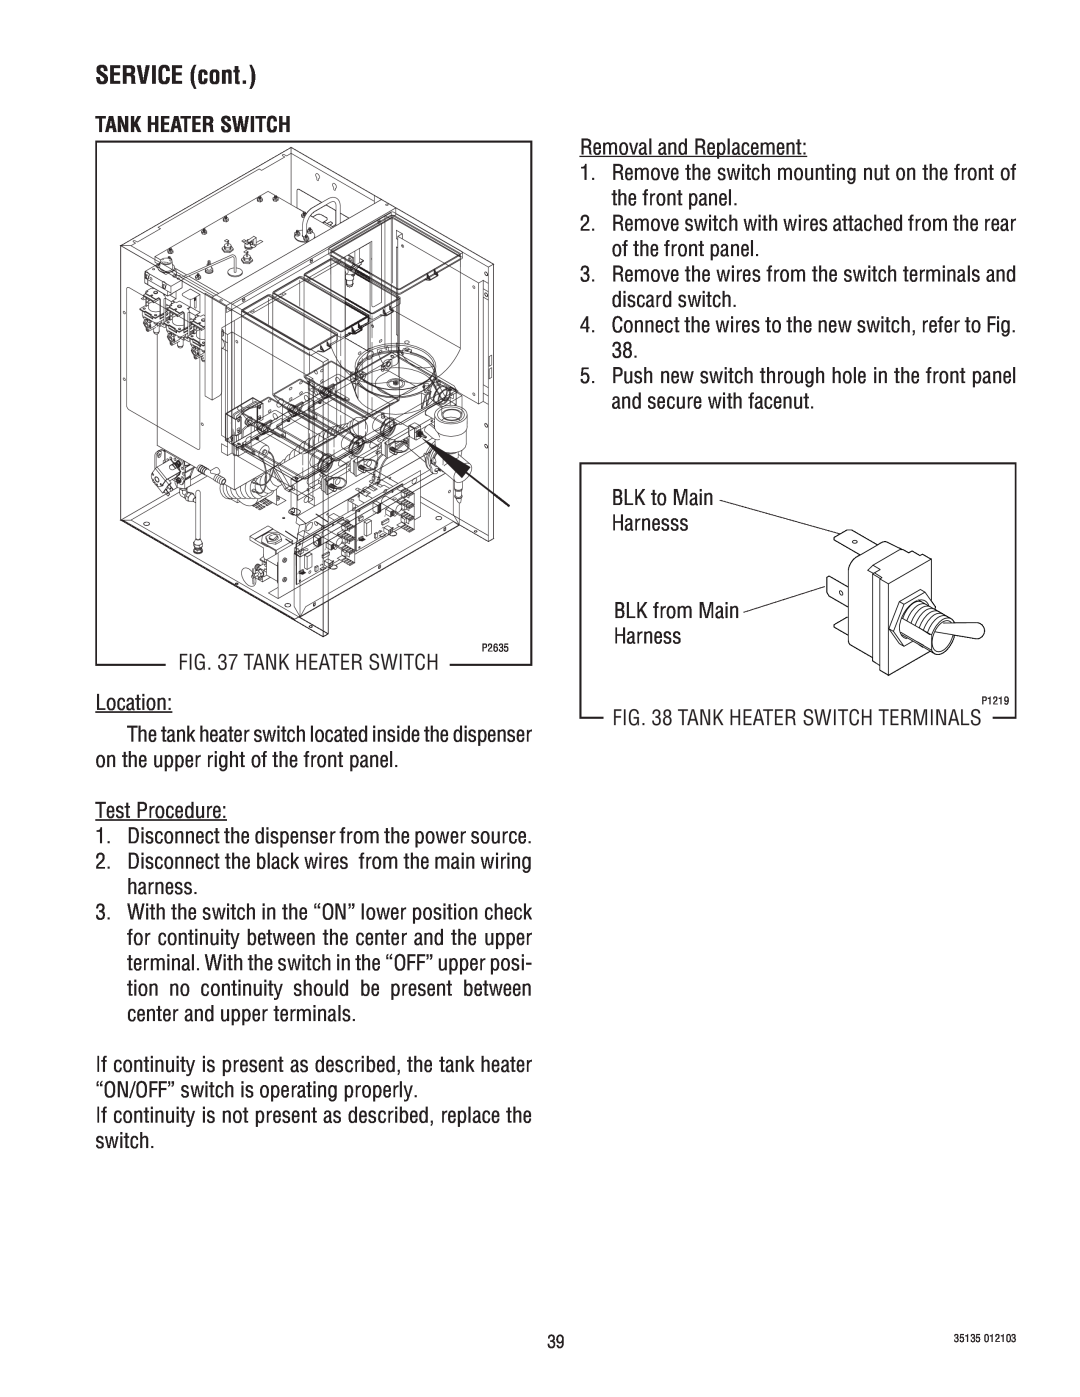 Bunn FMD-4, FMD-5 service manual Tank Heater Switch, SERVICE cont 